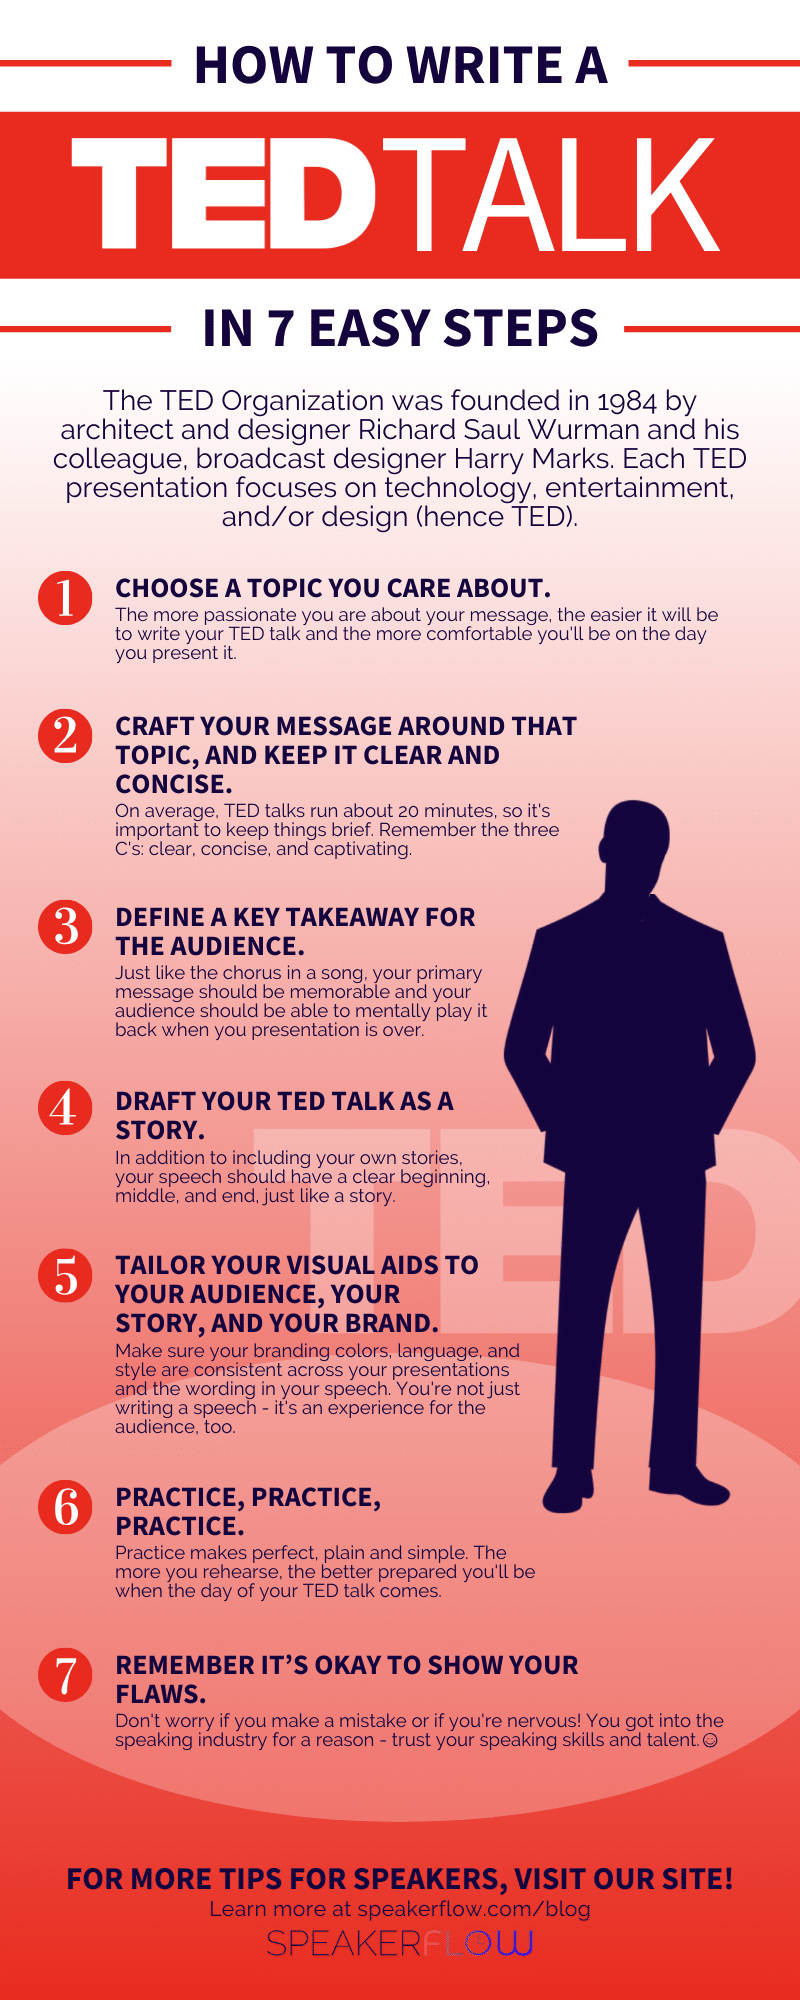 How To Write A TED Talk In 7 Quick And Easy Steps